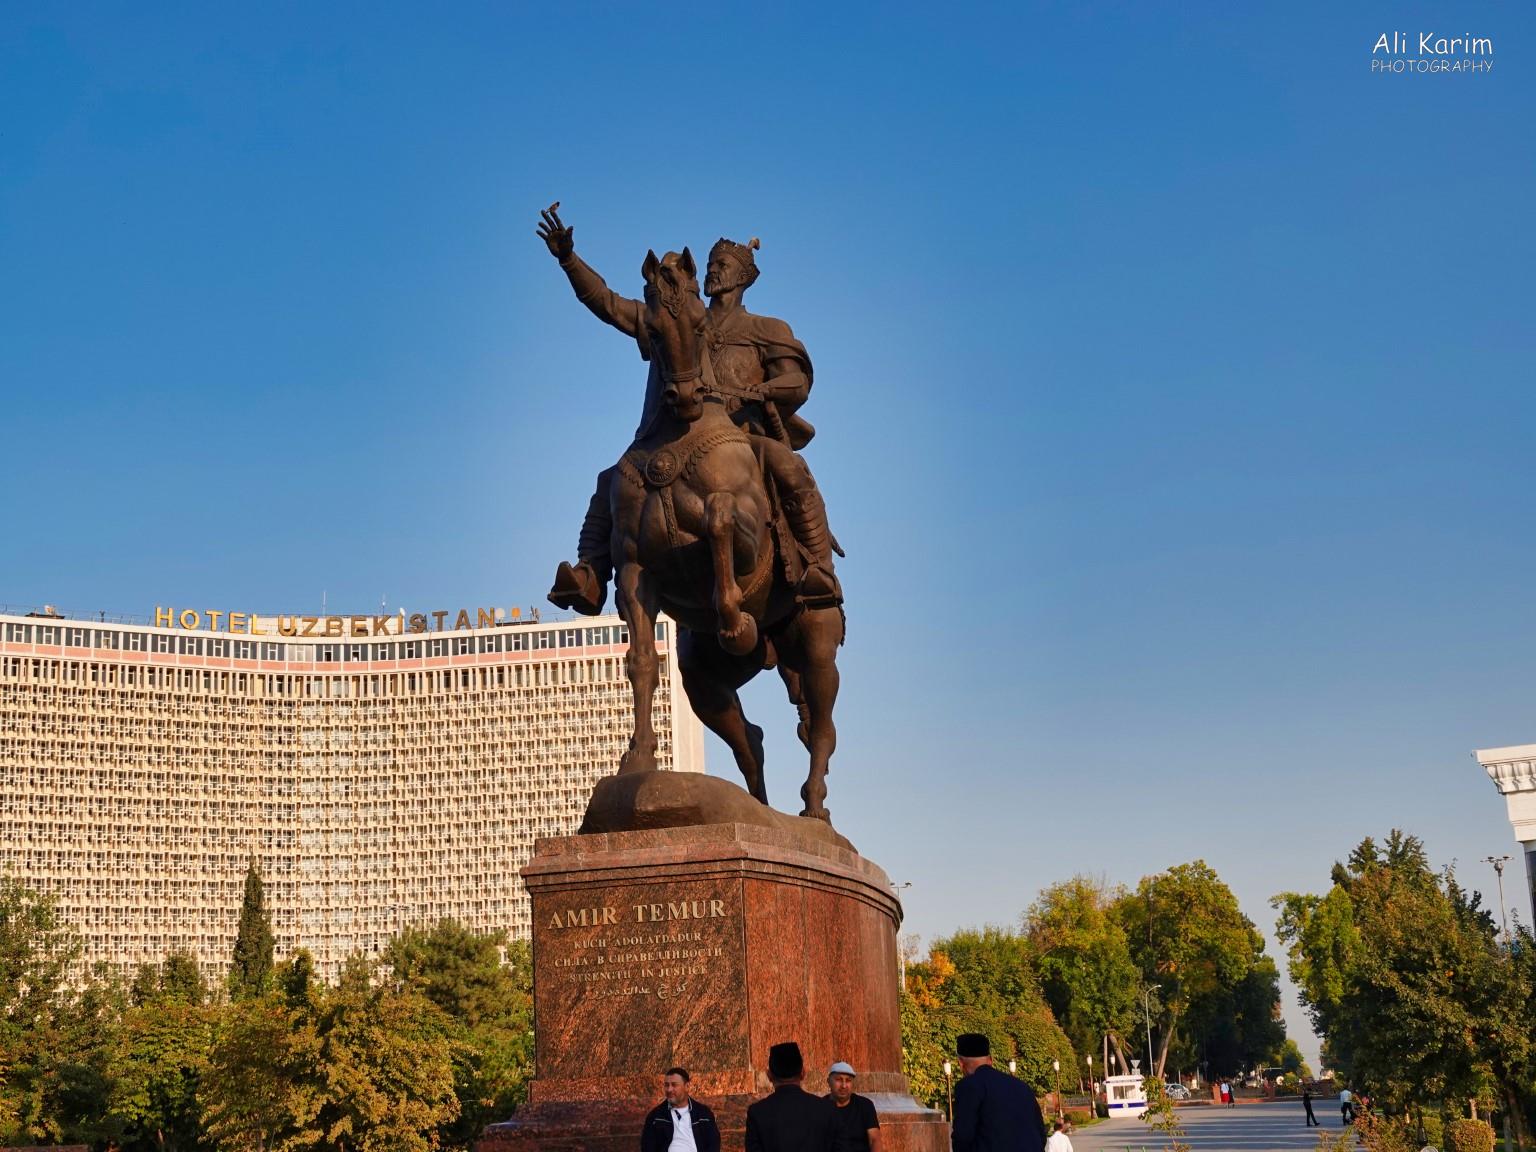 Tashkent, Oct 2019, Amir Timur statue in the center of the huge square and gardens